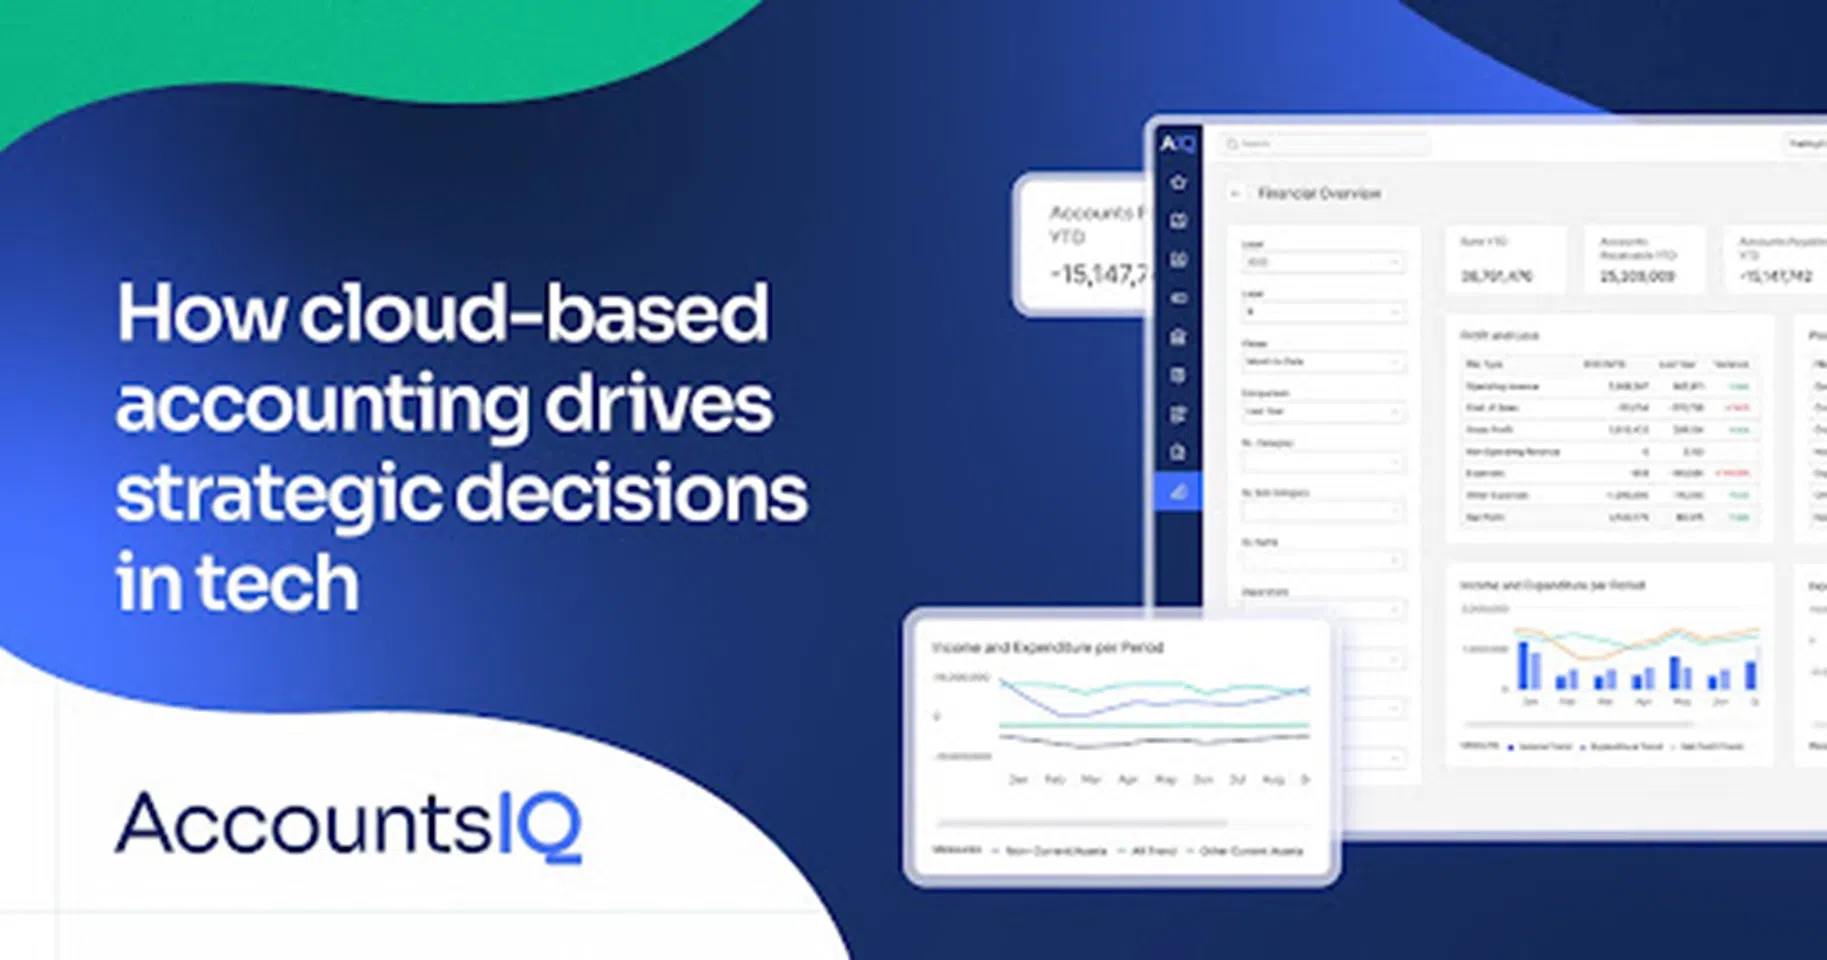 AccountsIQ: How cloud-based accounting drives strategic decisions in tech image